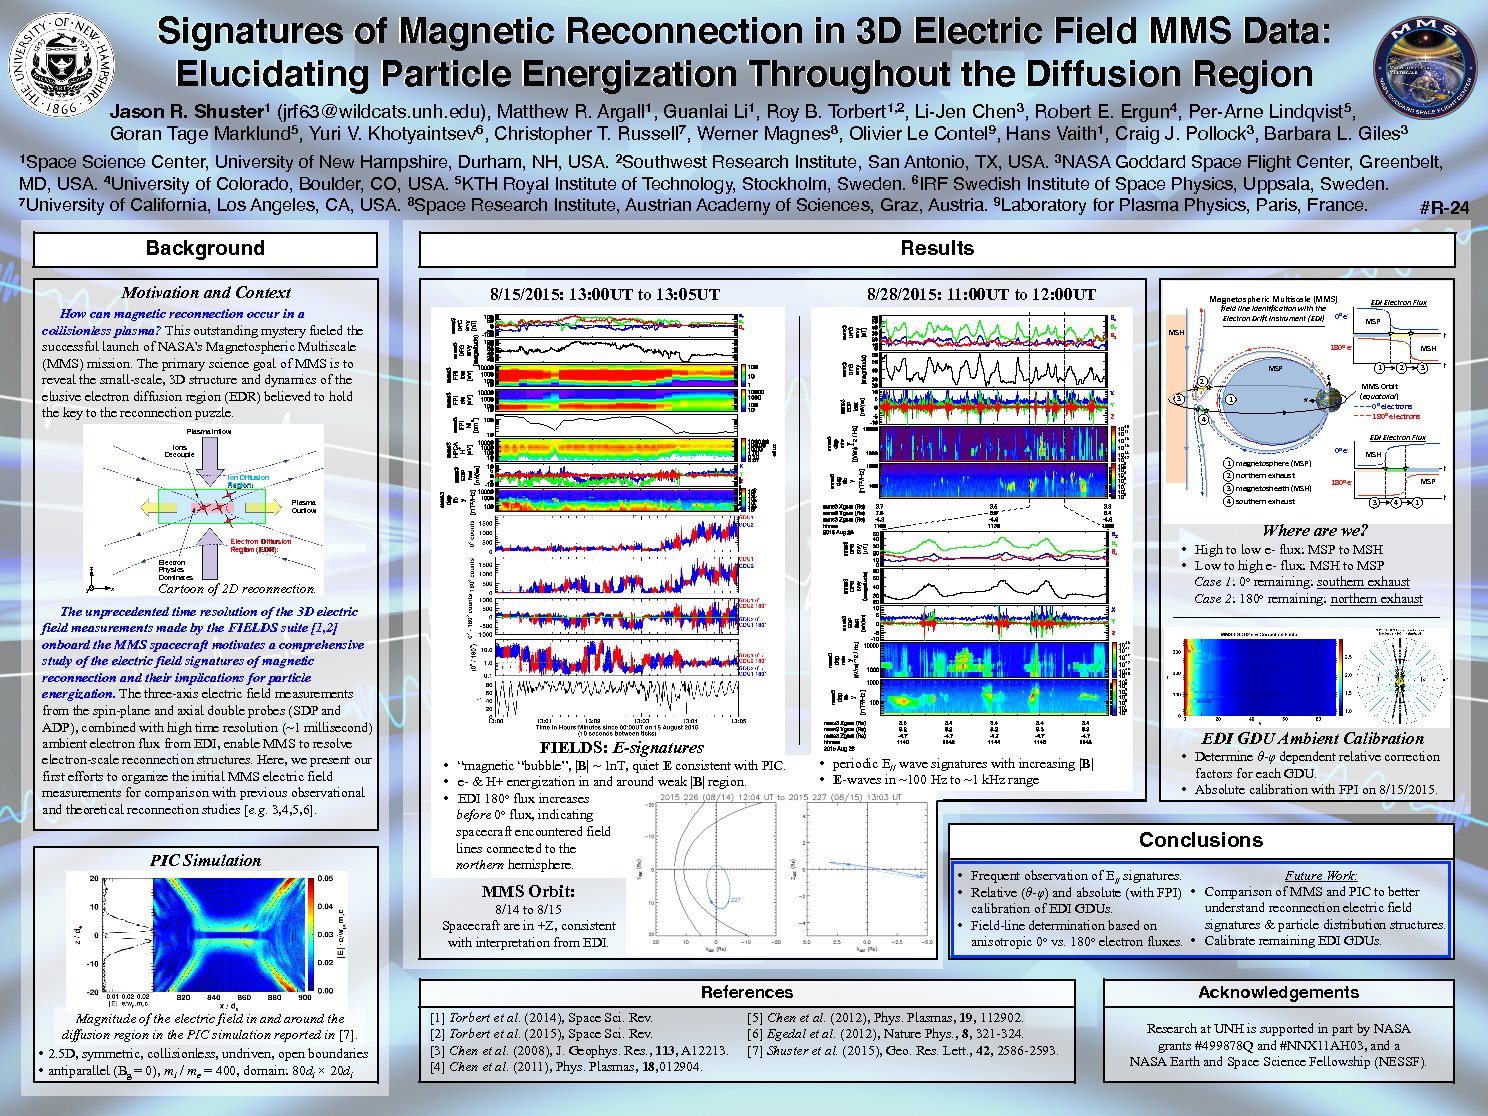 Signatures Of Magnetic Reconnection In 3d Electric Field Mms Data: Elucidating Particle Energization Throughout The Diffusion Region by shuster